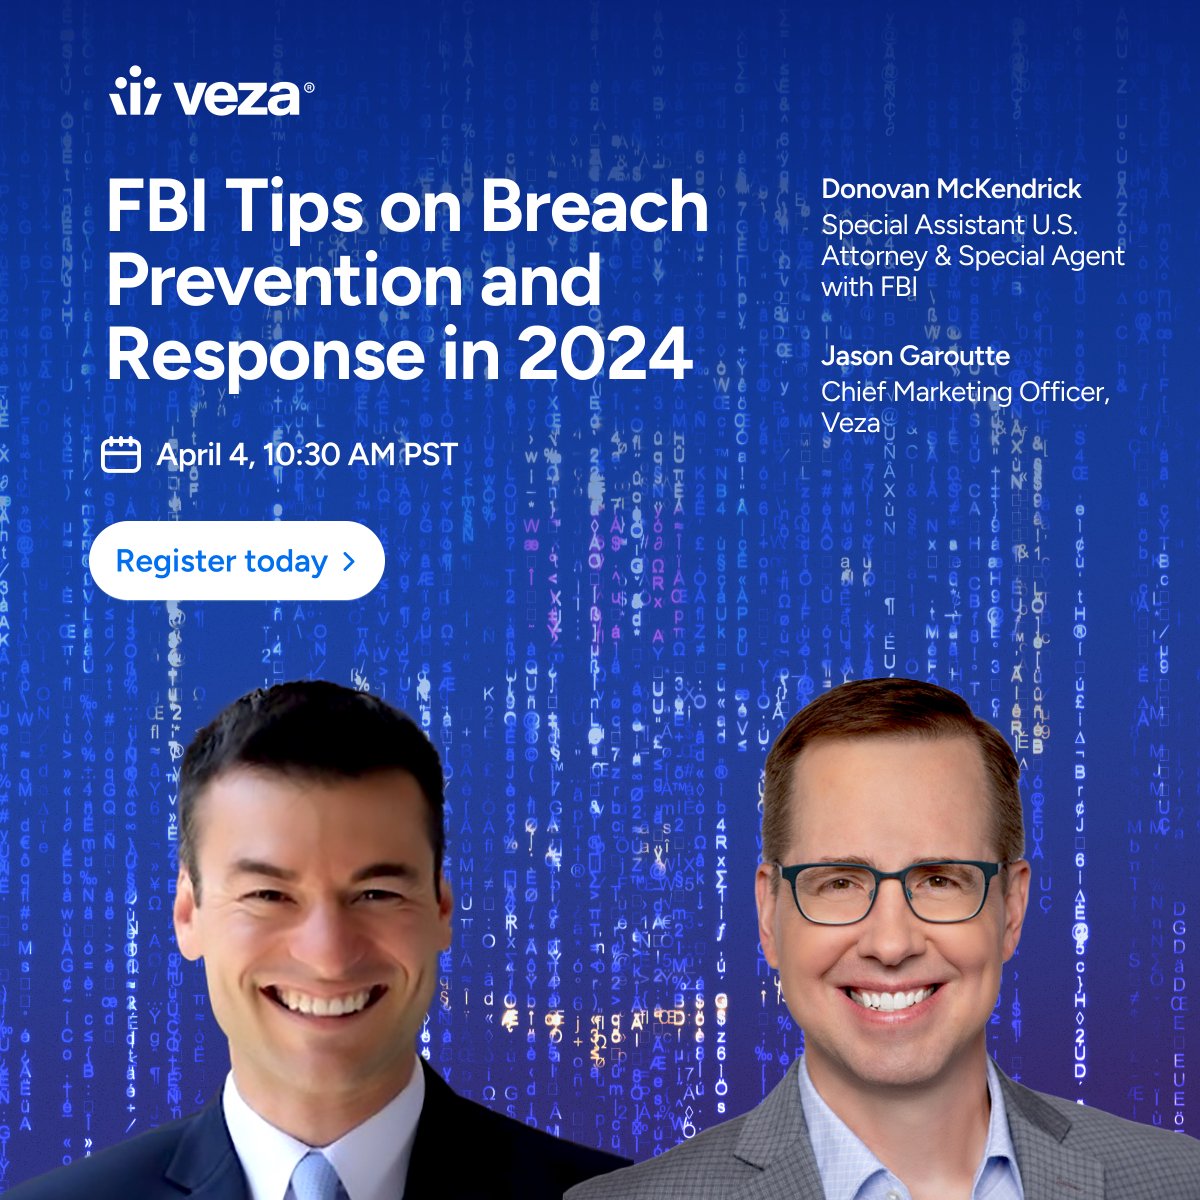 🚨 Tune in for FBI Tips for breach prevention on April 4th! 🚨 Hear #FBI Agent and Special Assistant U.S. Attorney, Donovan McKendrick share strategies for navigating the 2024 threat landscape. bit.ly/494oE9m #cloudsecurity #cybersecurity #identitysecurity